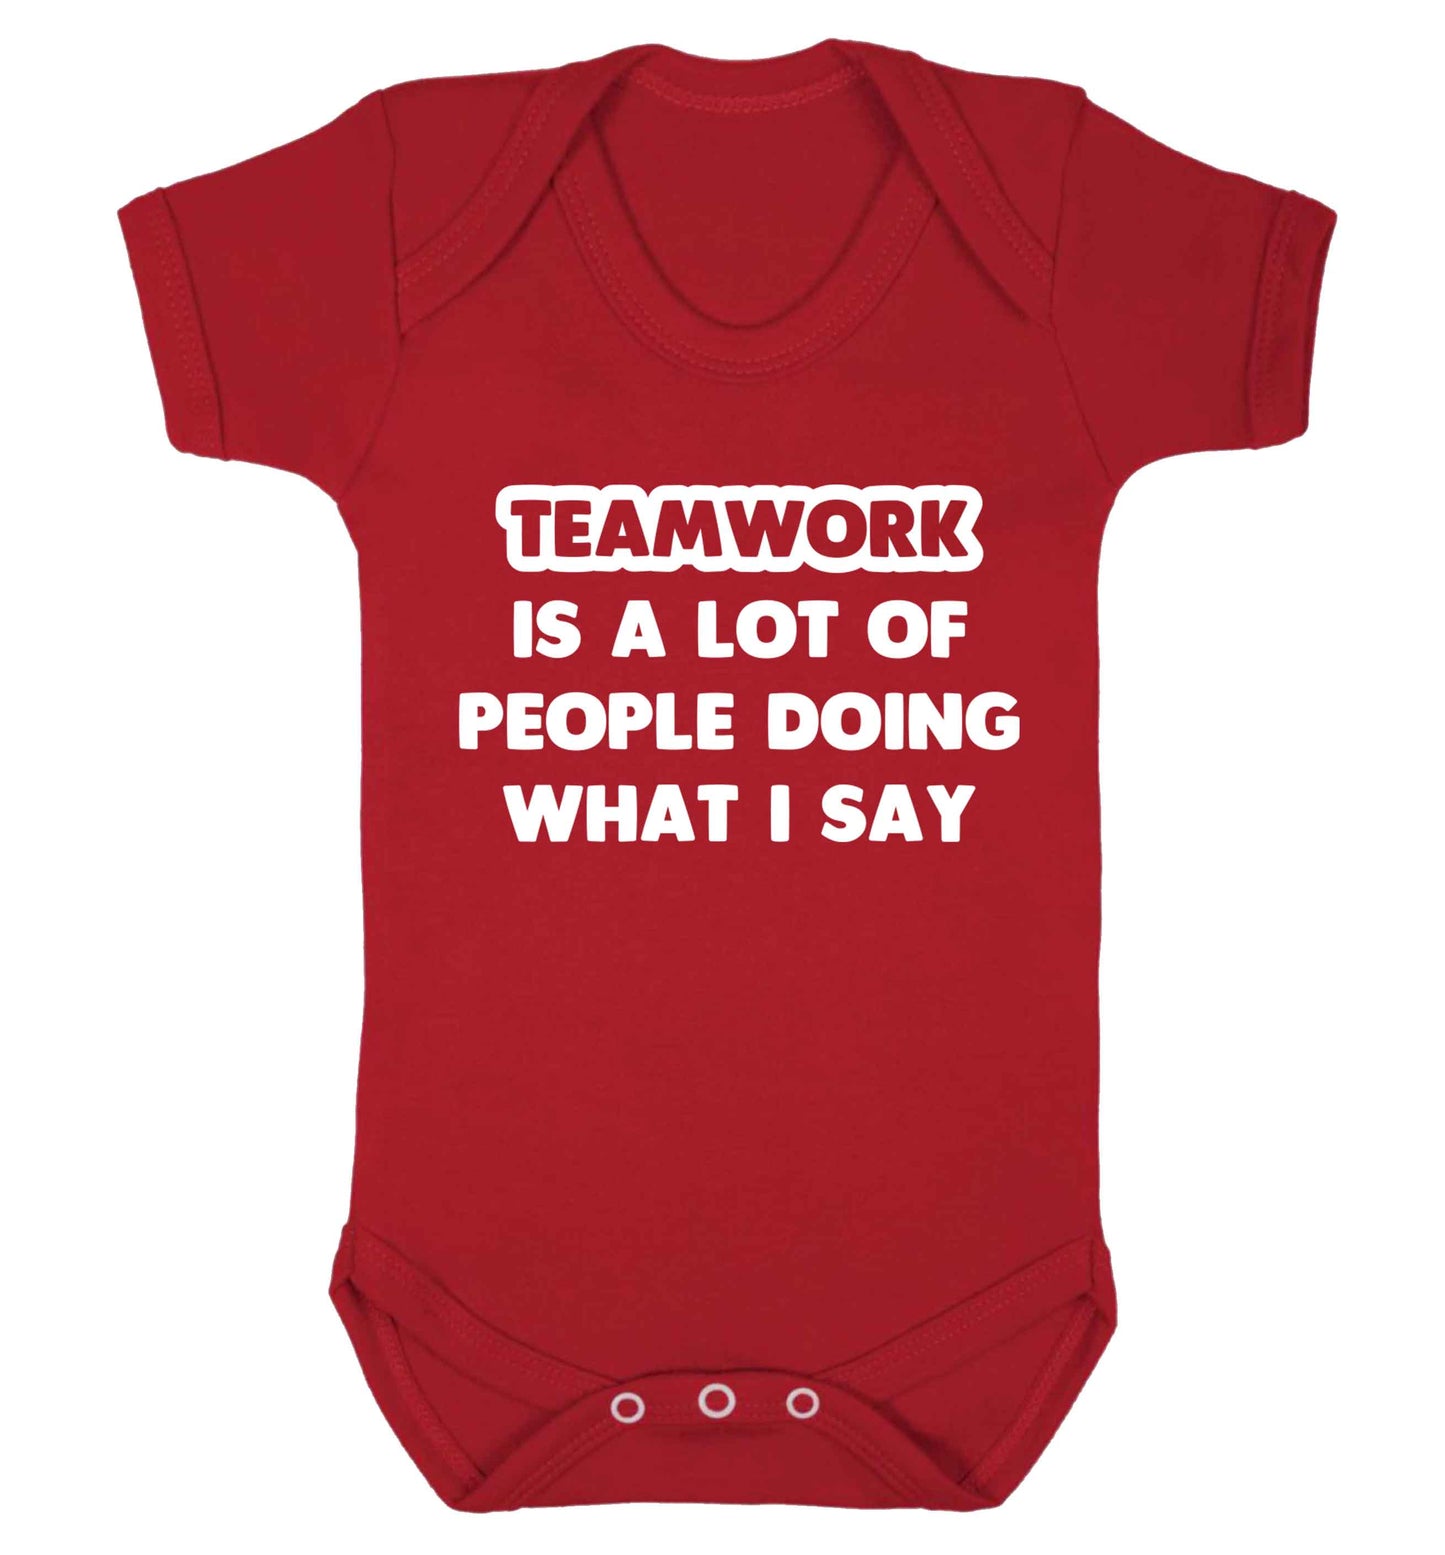 Teamwork is a lot of people doing what I say Baby Vest red 18-24 months